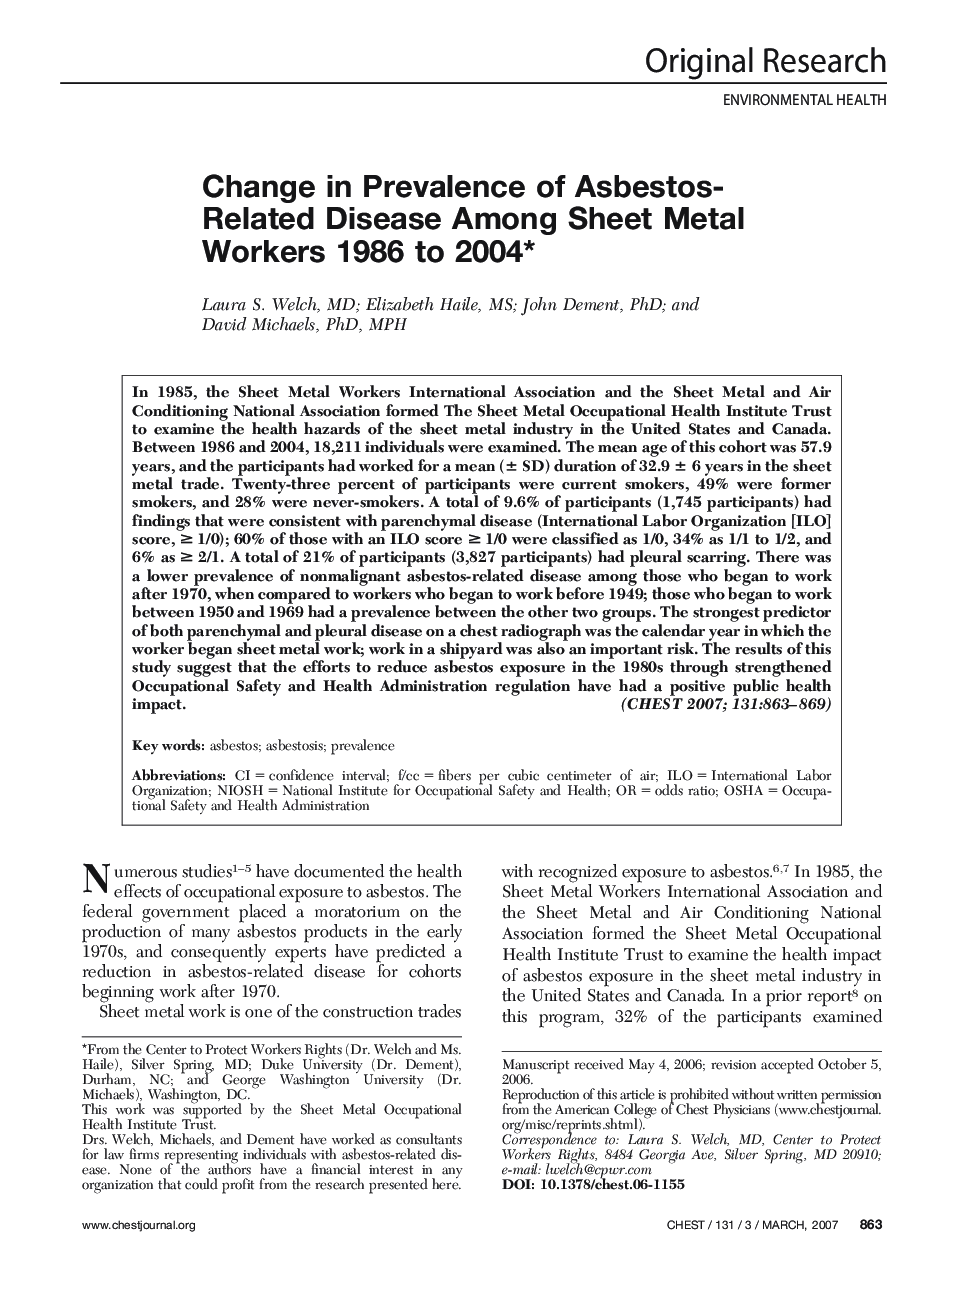 Change in Prevalence of Asbestos-Related Disease Among Sheet Metal Workers 1986 to 2004